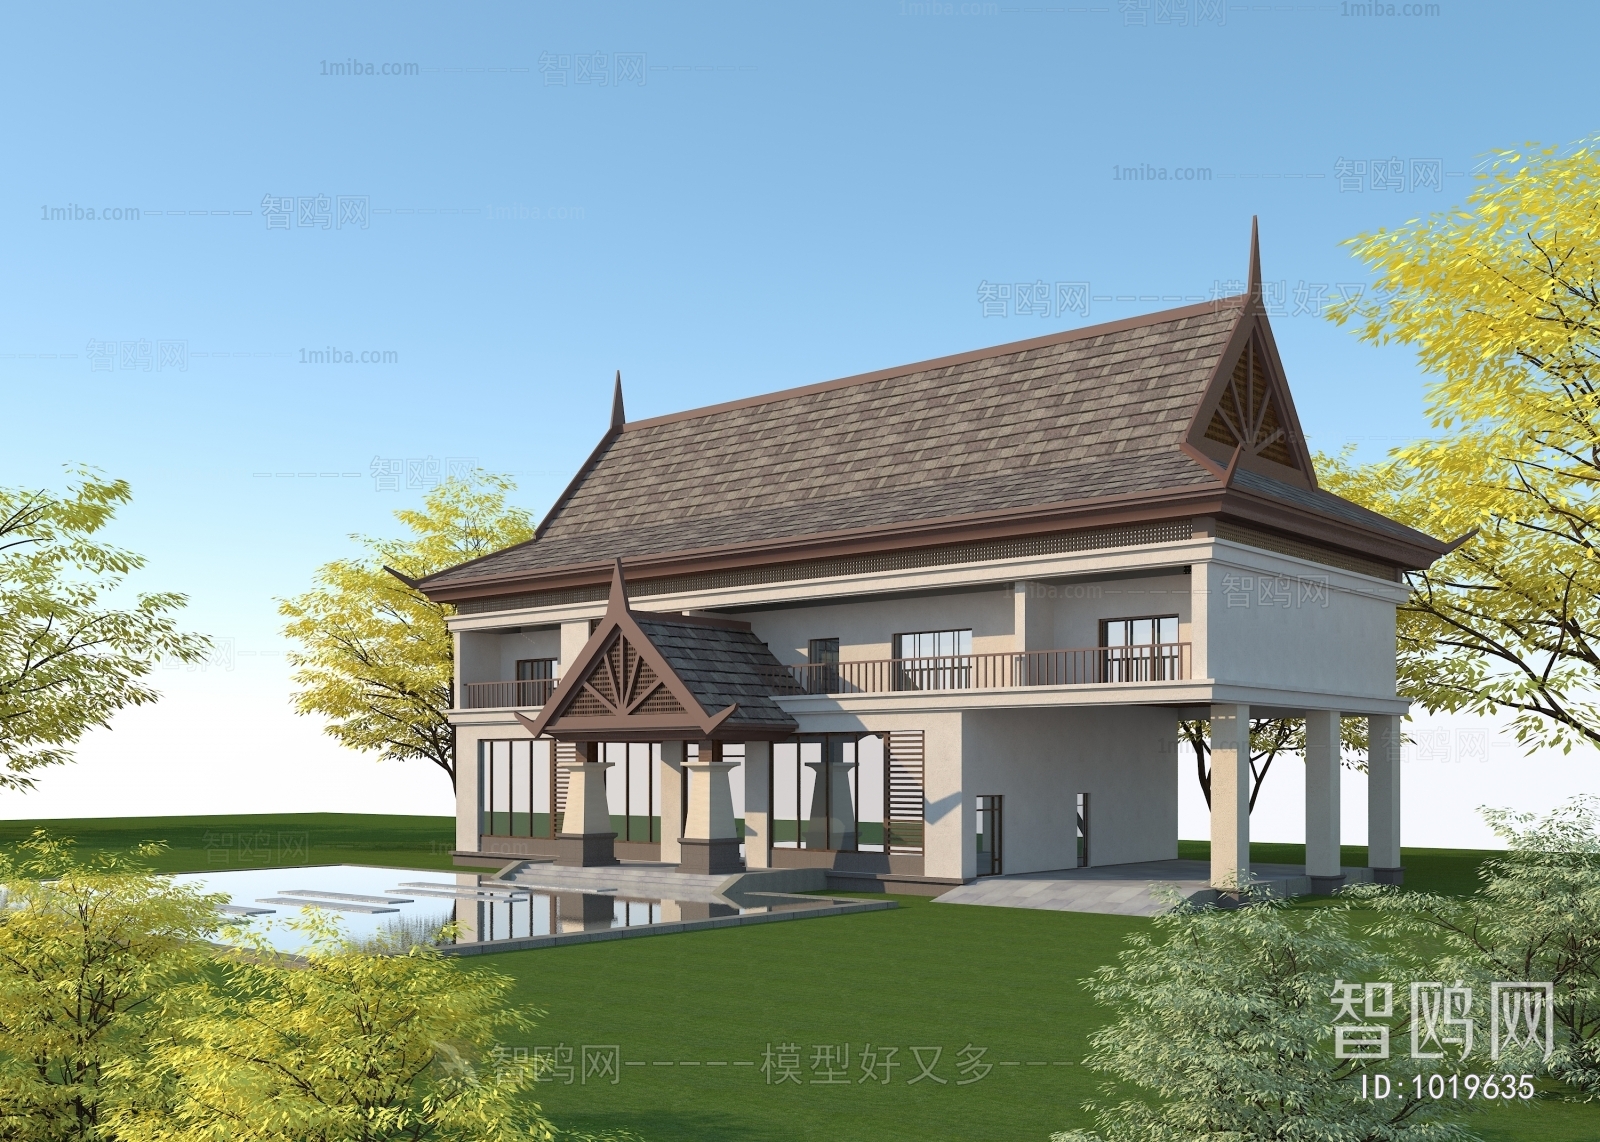 Southeast Asian Style Building Appearance